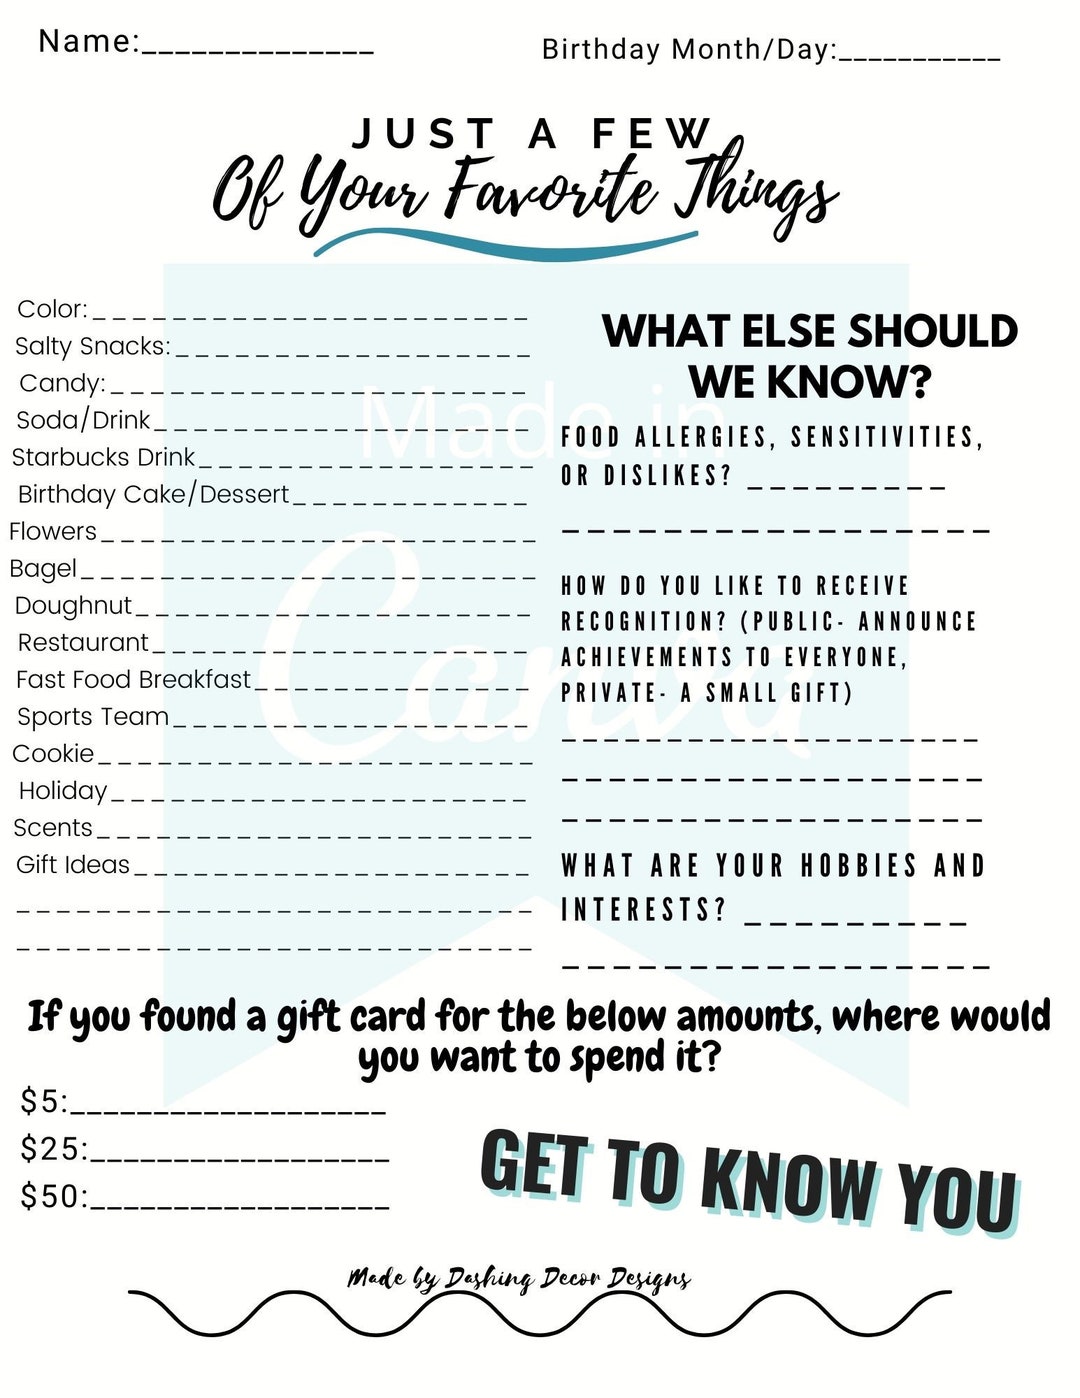 Employee Favorites List Get to Know Employee Employee - Etsy